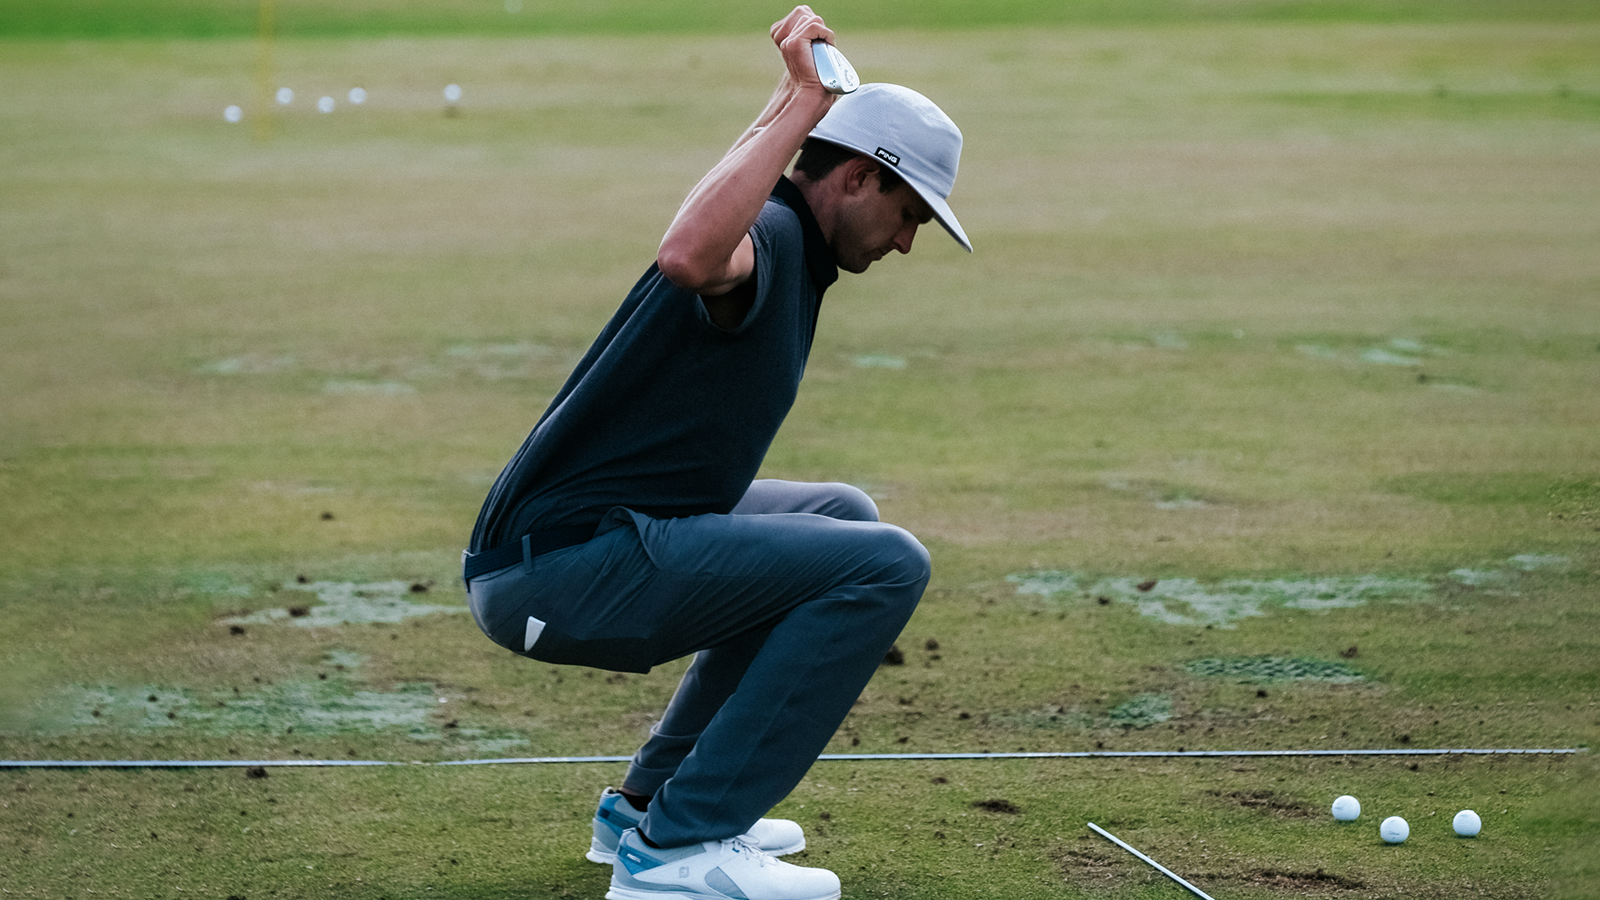 The Best Pre-Round Stretching Routine is One Unique to You